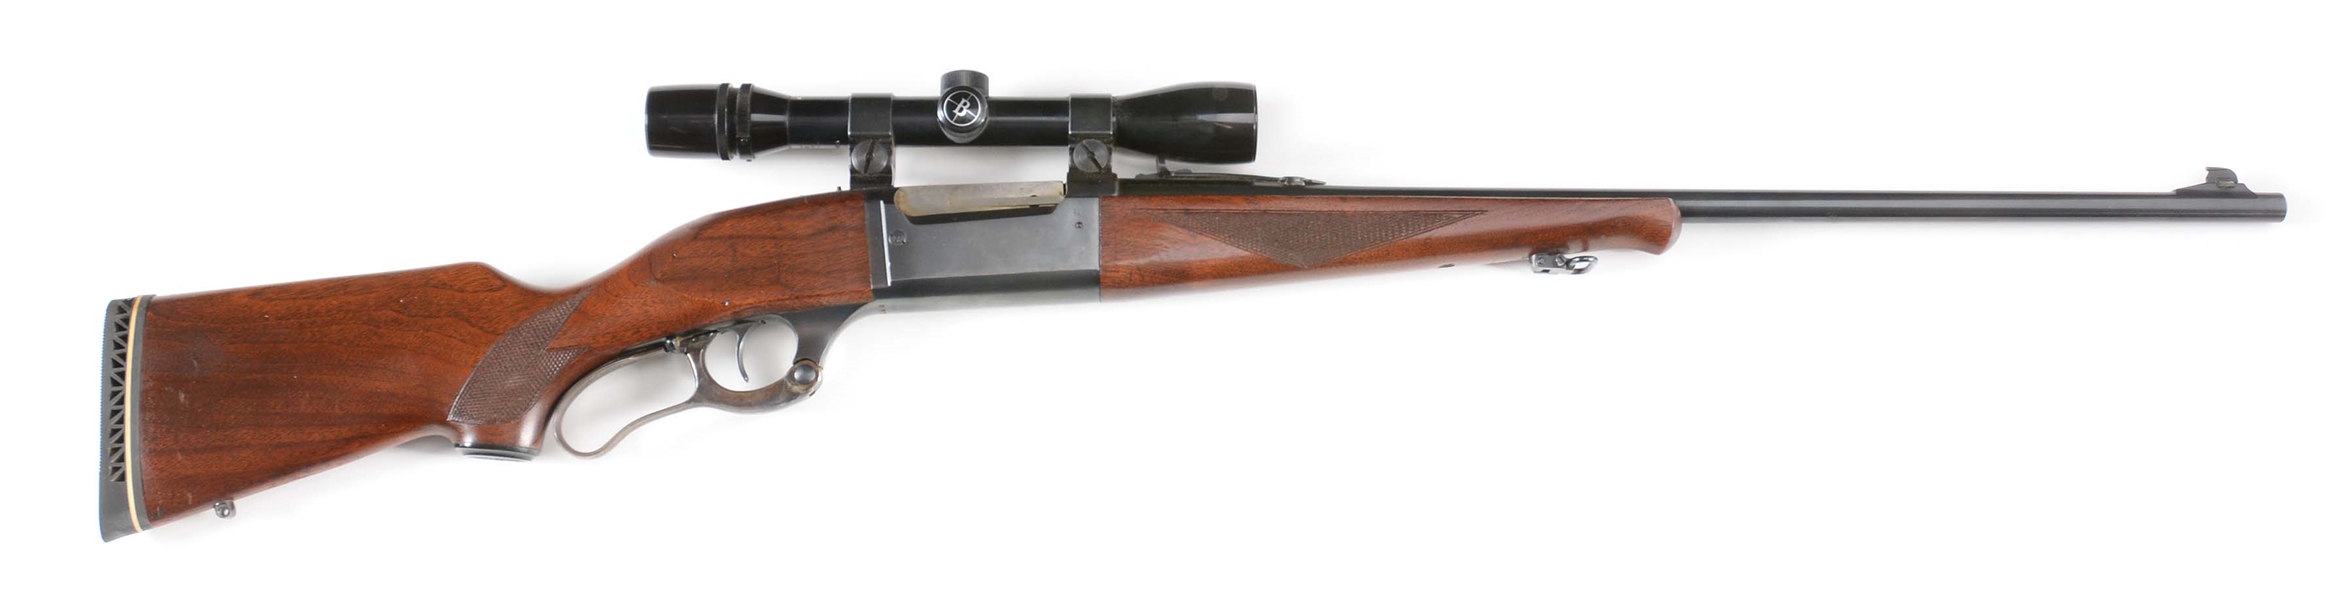 (C) SAVAGE MODEL 99 LEVER ACTION RIFLE WITH SCOPE (1953).